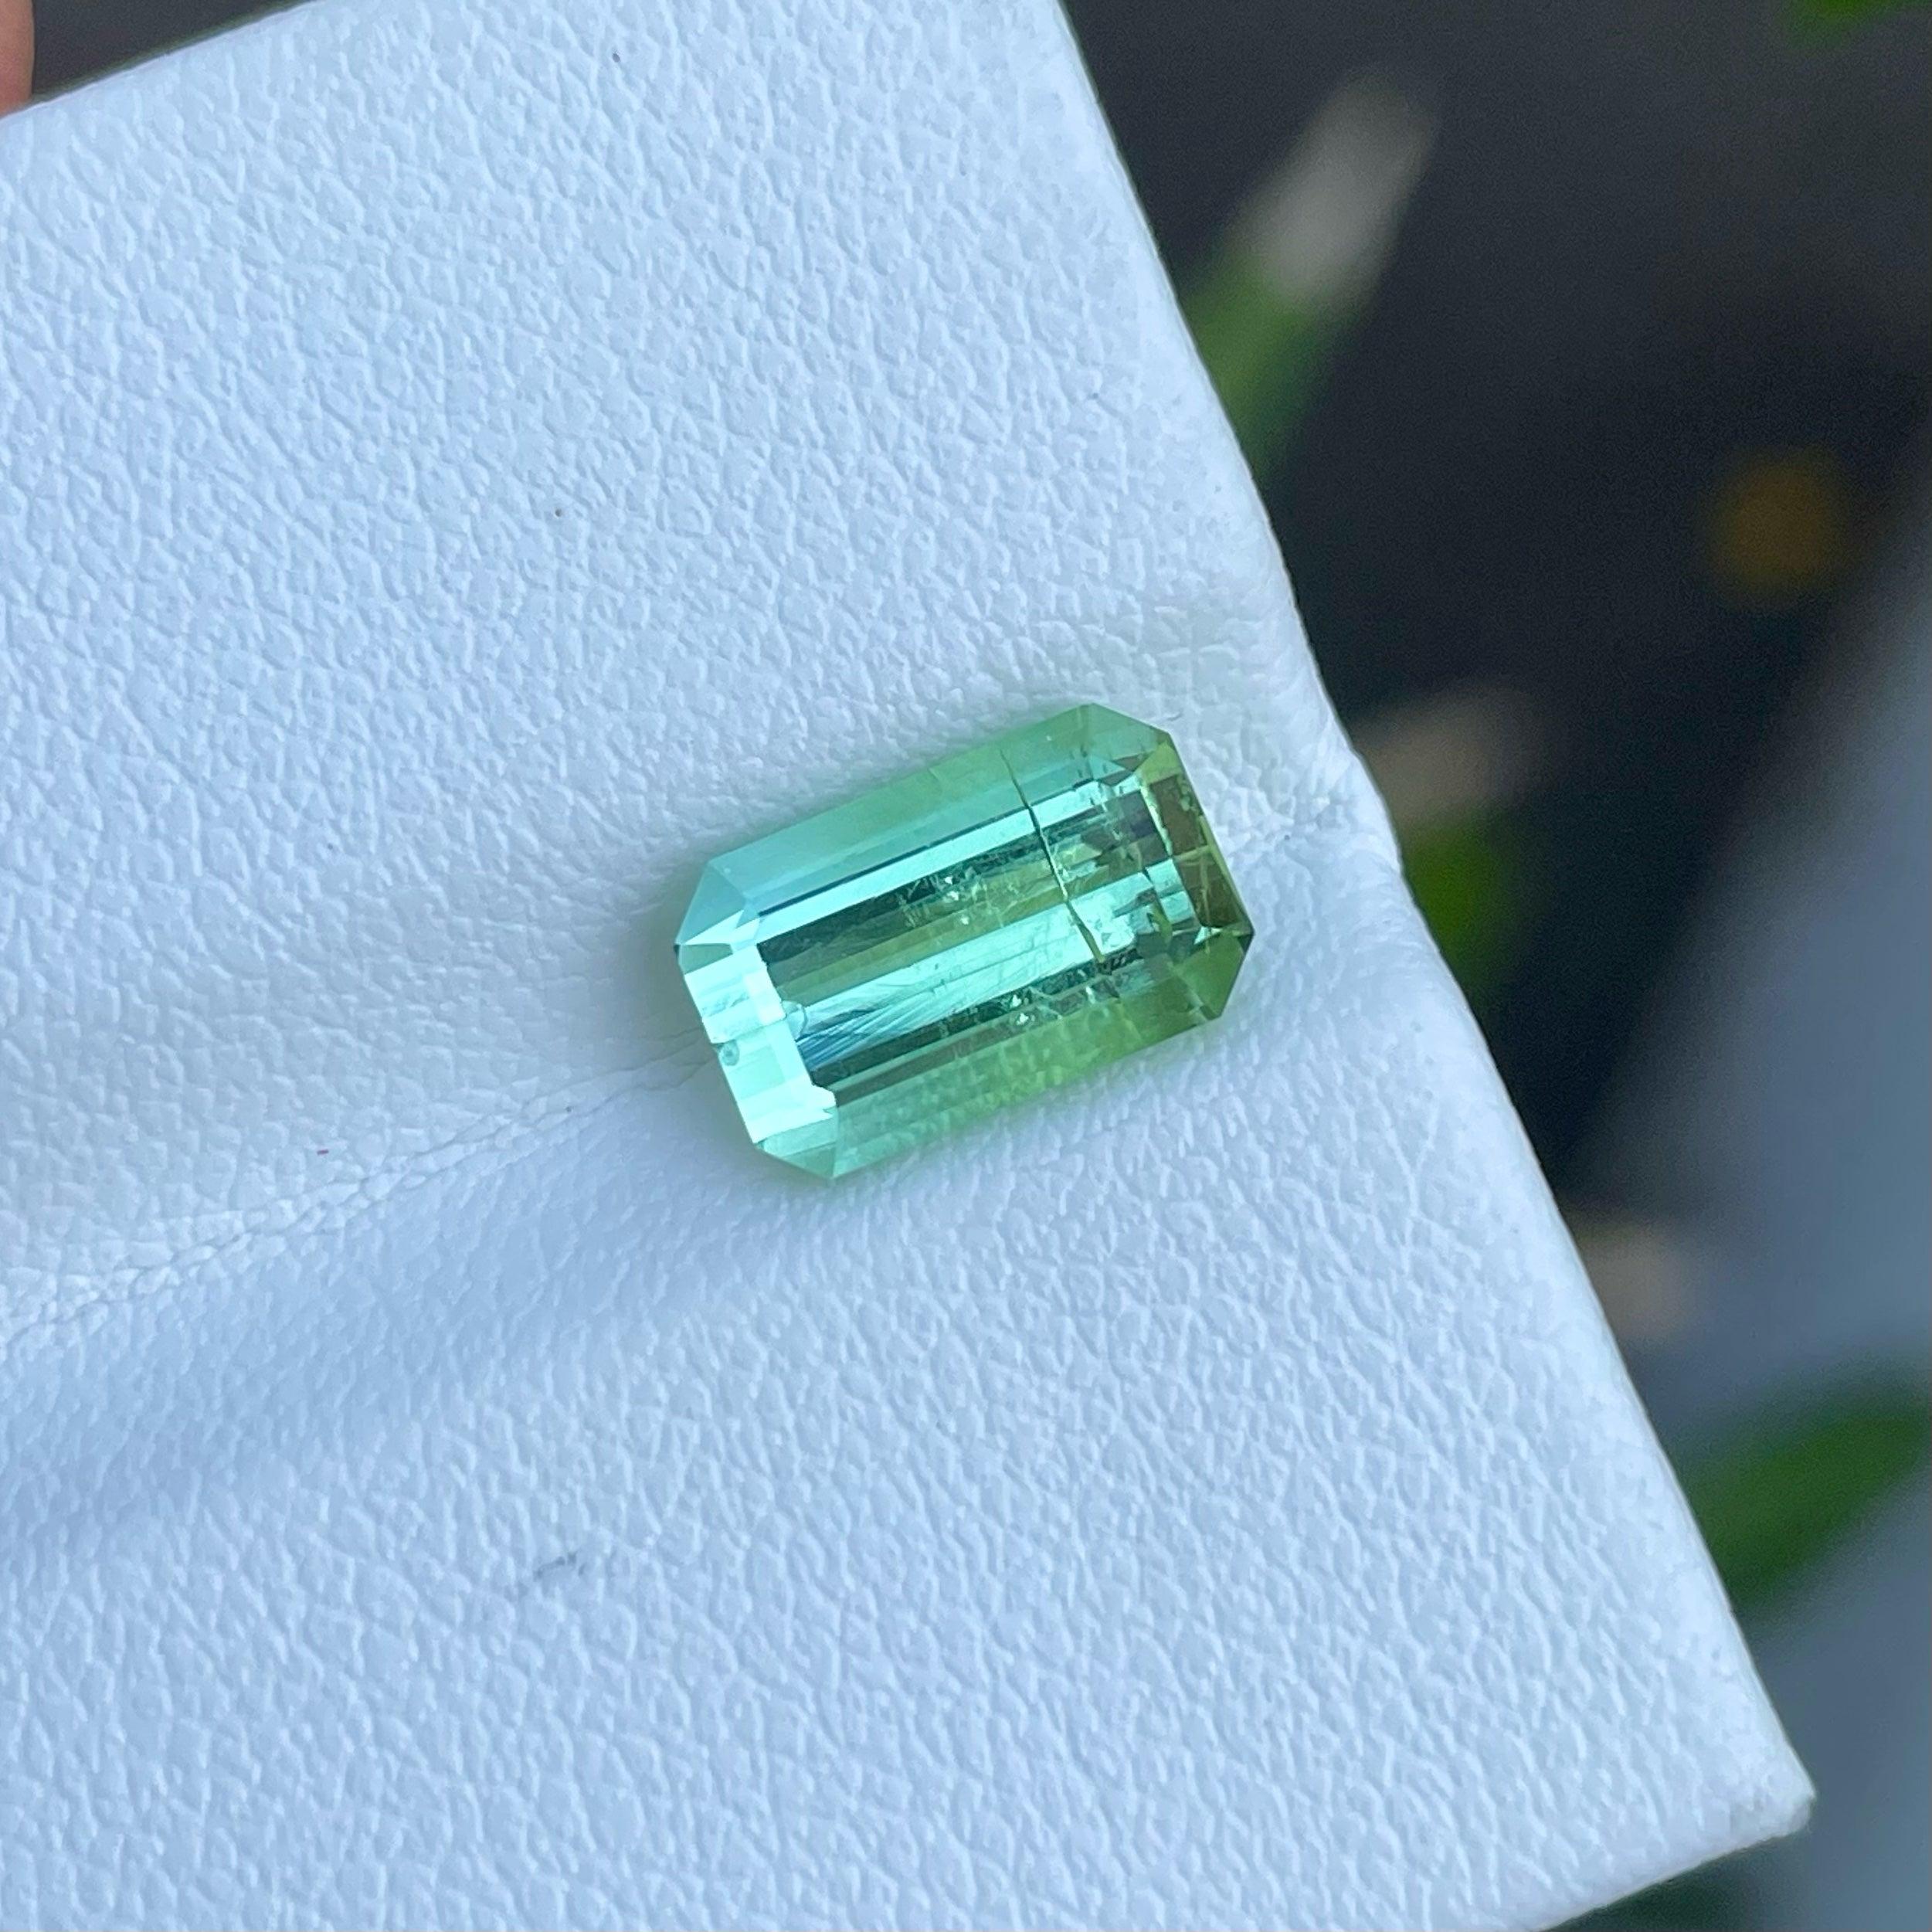 Natural Light Green Loose Tourmaline Gem, Available For Sale At Wholesale Price Natural High Quality 3.0 Carats SI Clarity Untreated Tourmaline From Afghanistan.

Product Information:
GEMSTONE TYPE:	Natural Light Green Loose Tourmaline